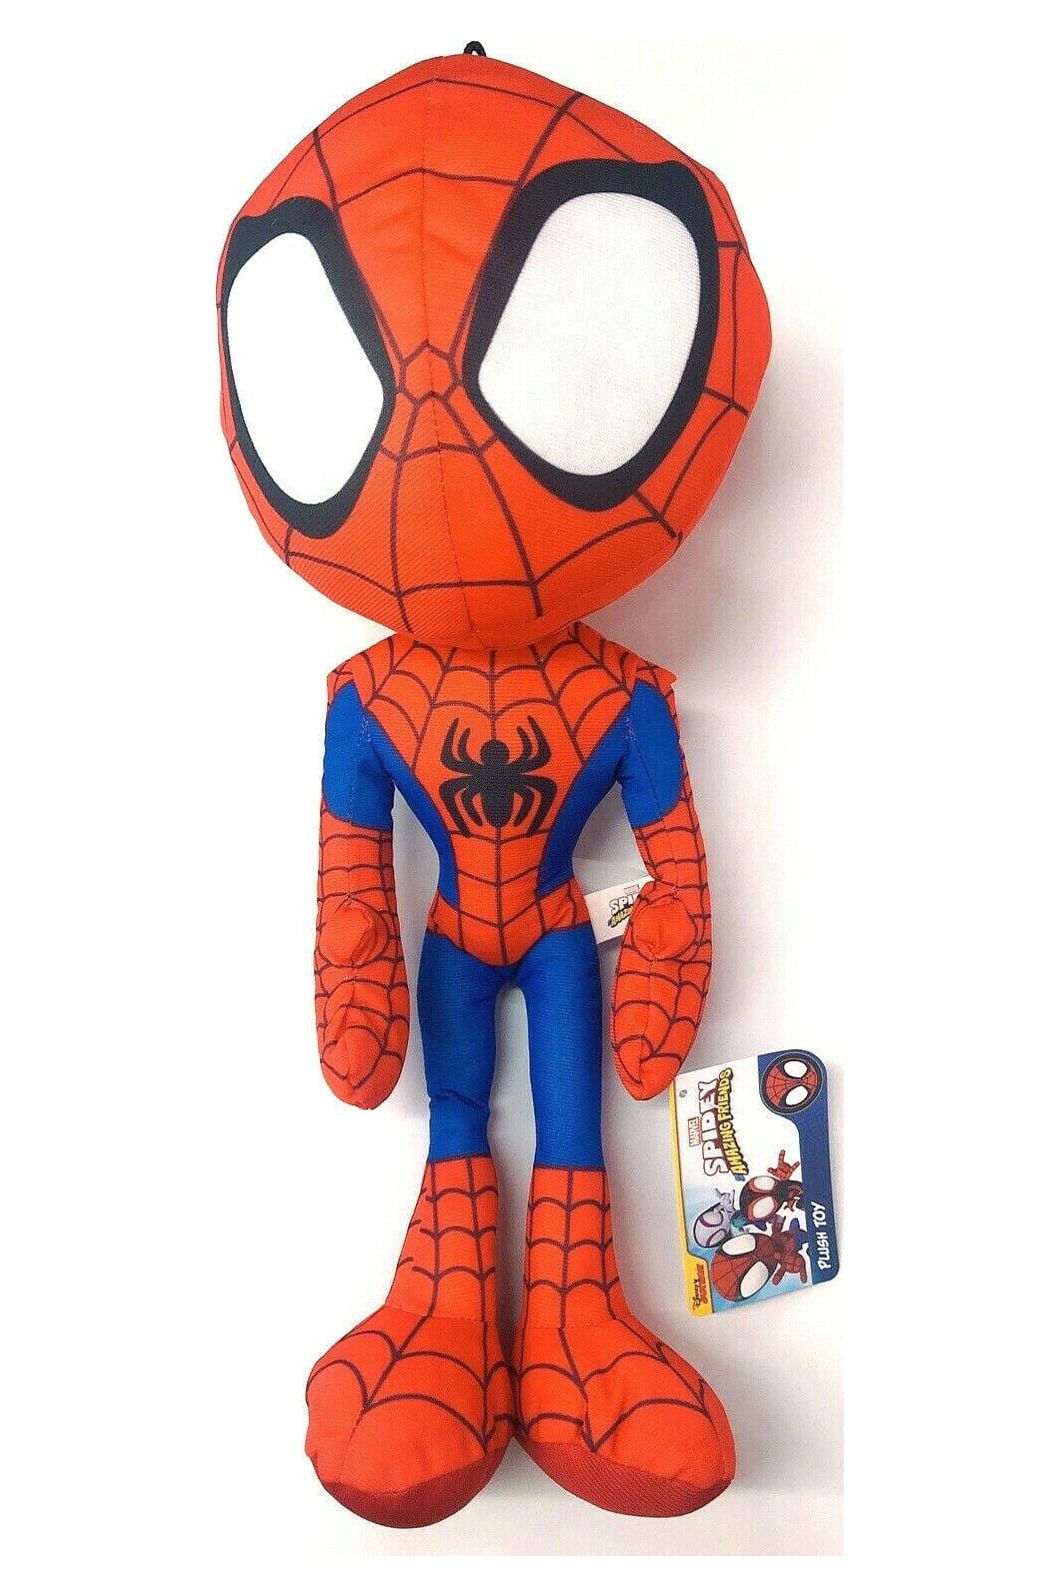 Spider-Man Spidey and His Amazing Friends 15 Plush Doll Toy 